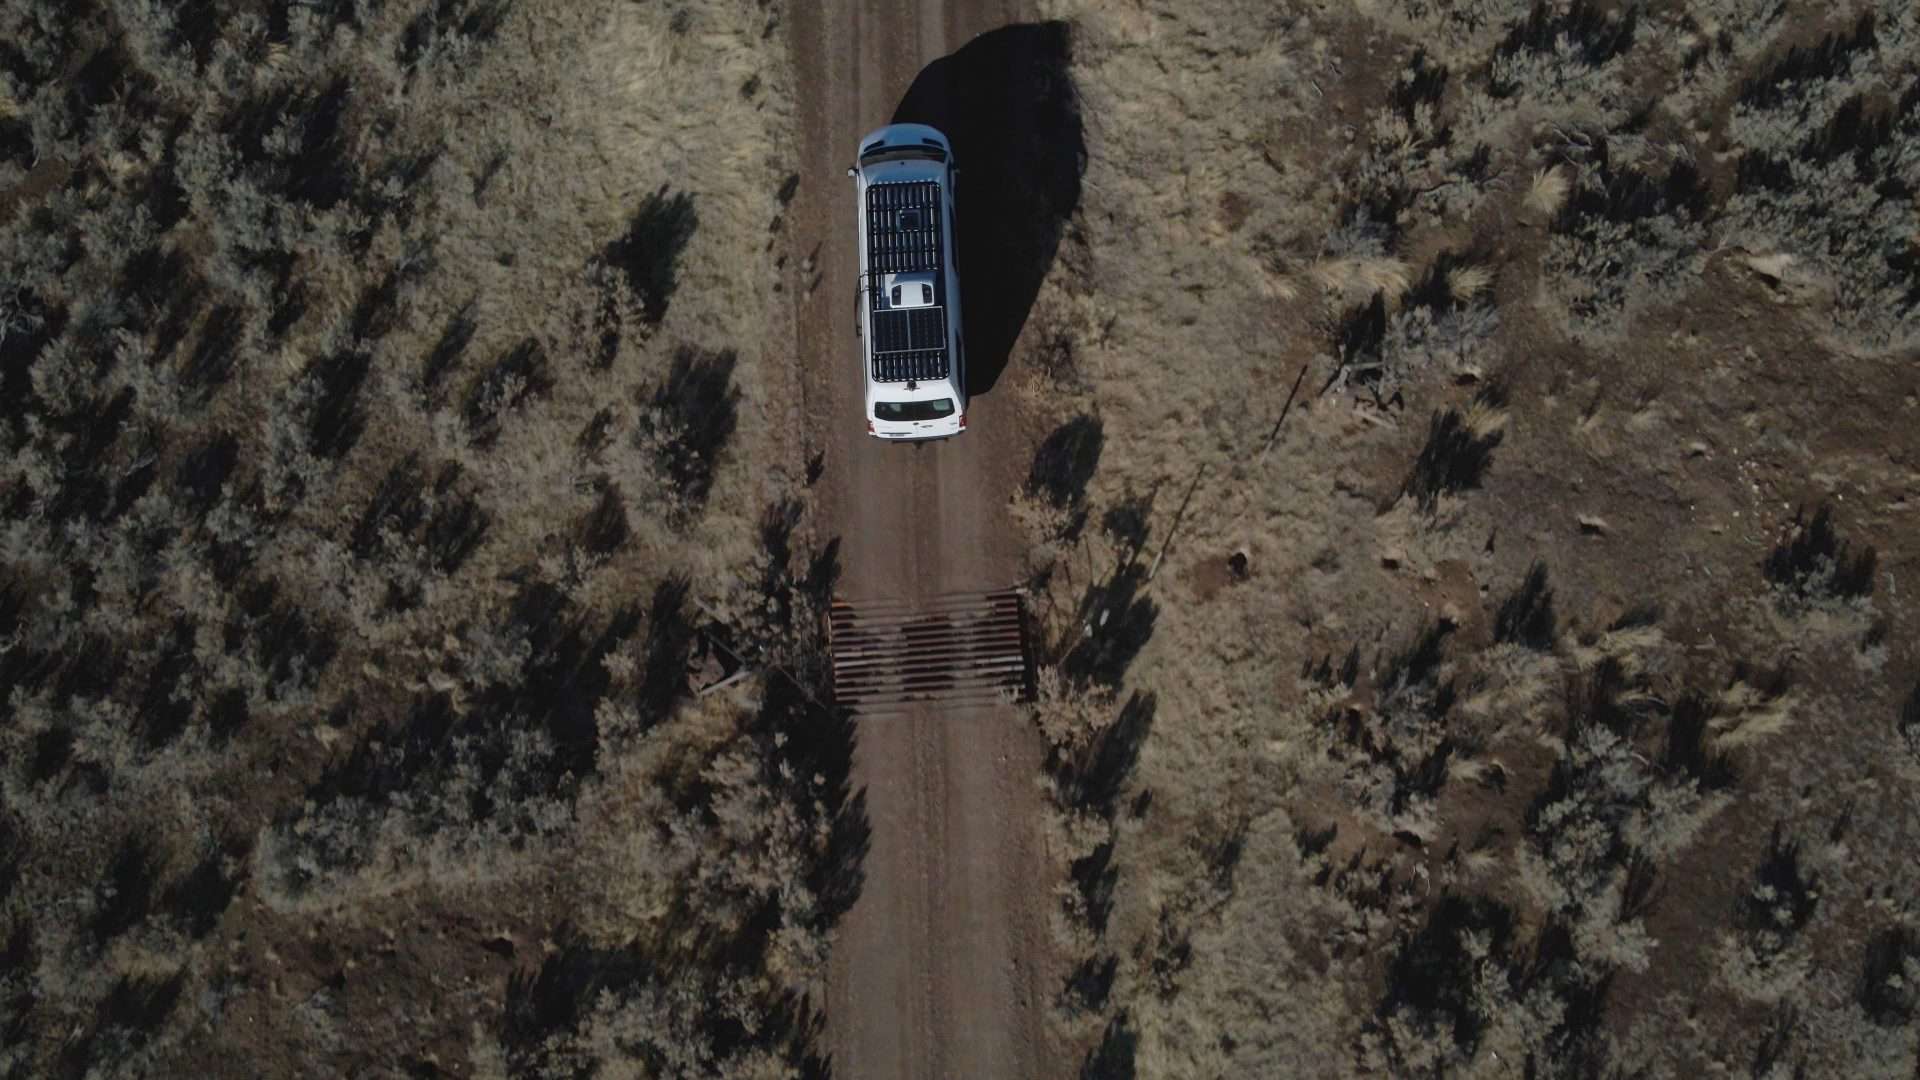 Aerial image of a Class B+ RV driving.